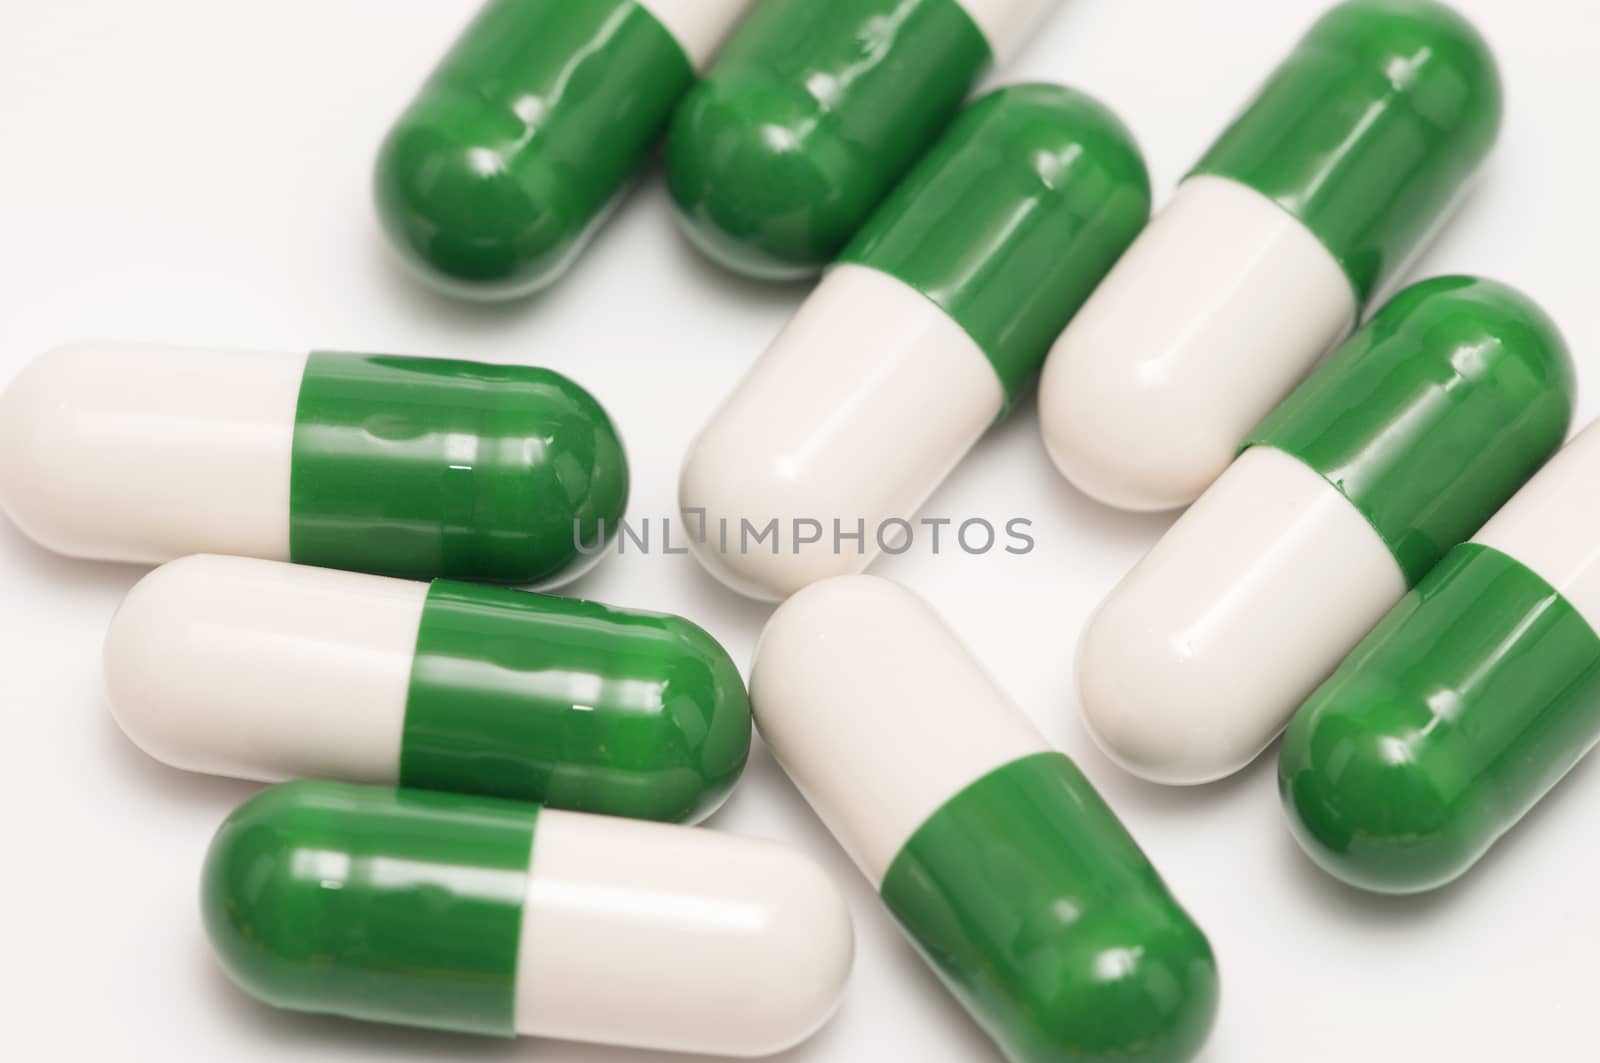 Some capsules and pills isolated on white background